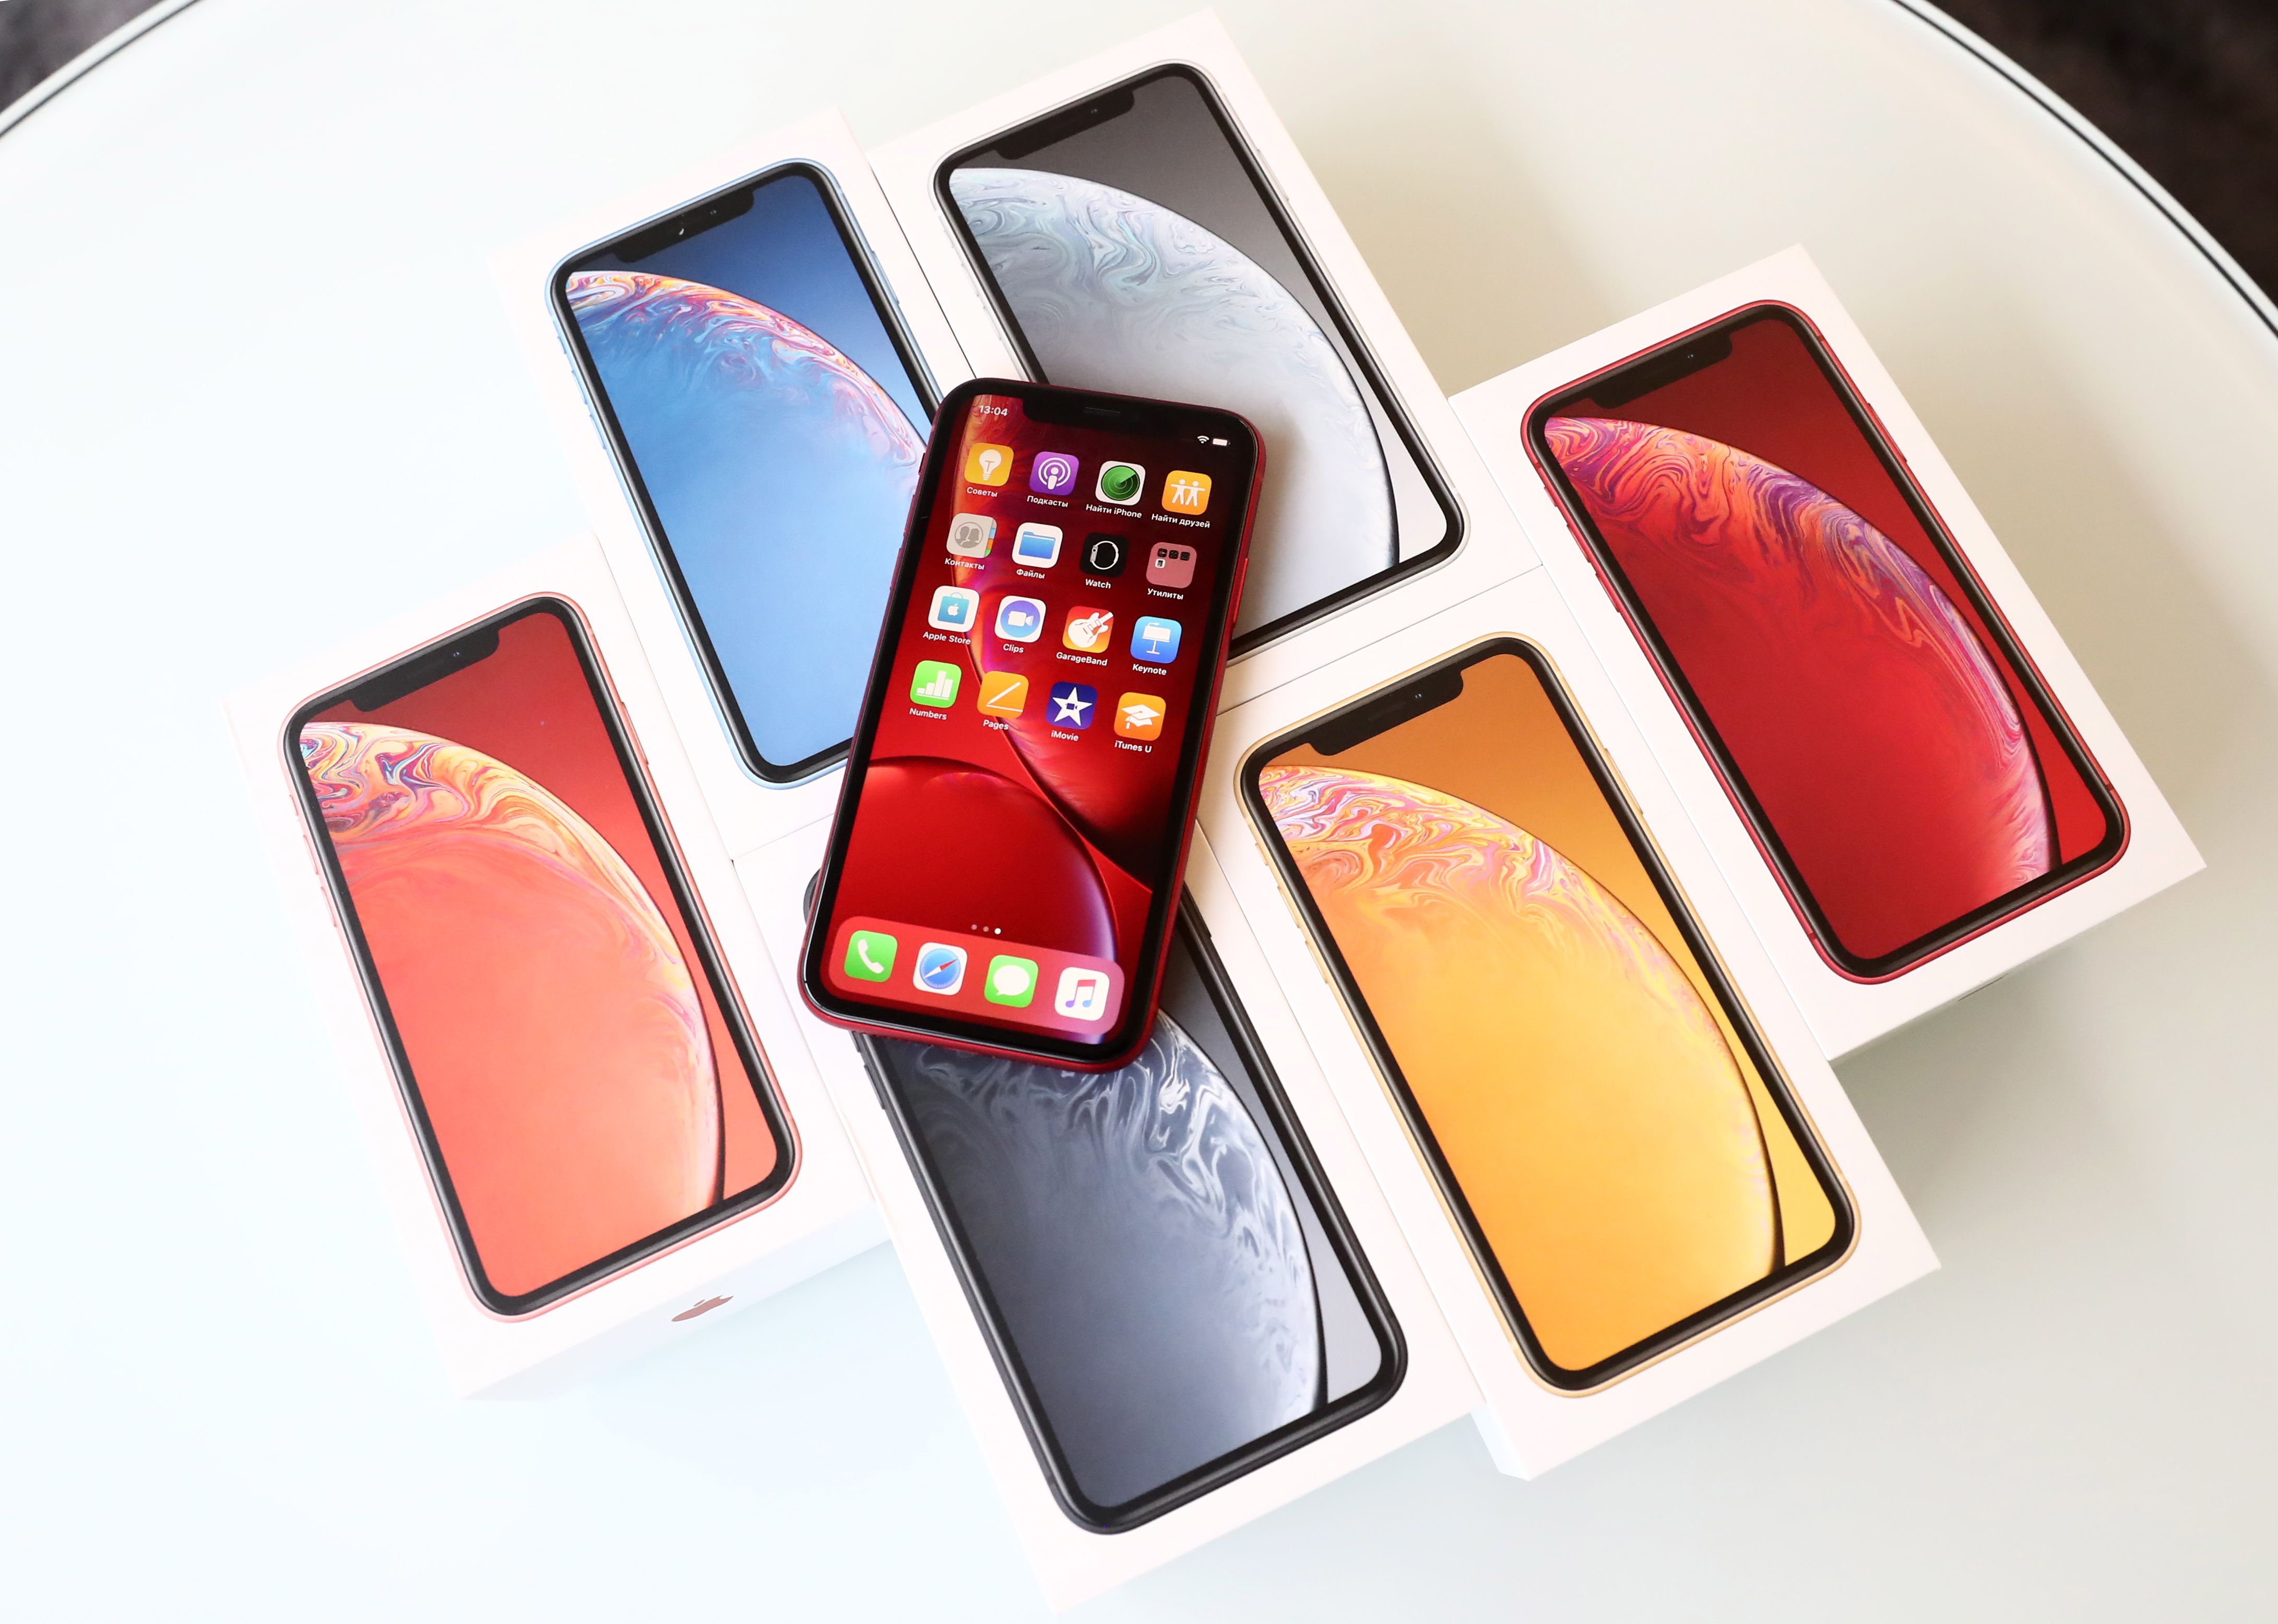 iPhone XR review: Apple's secret weapon to sell even more smartphones